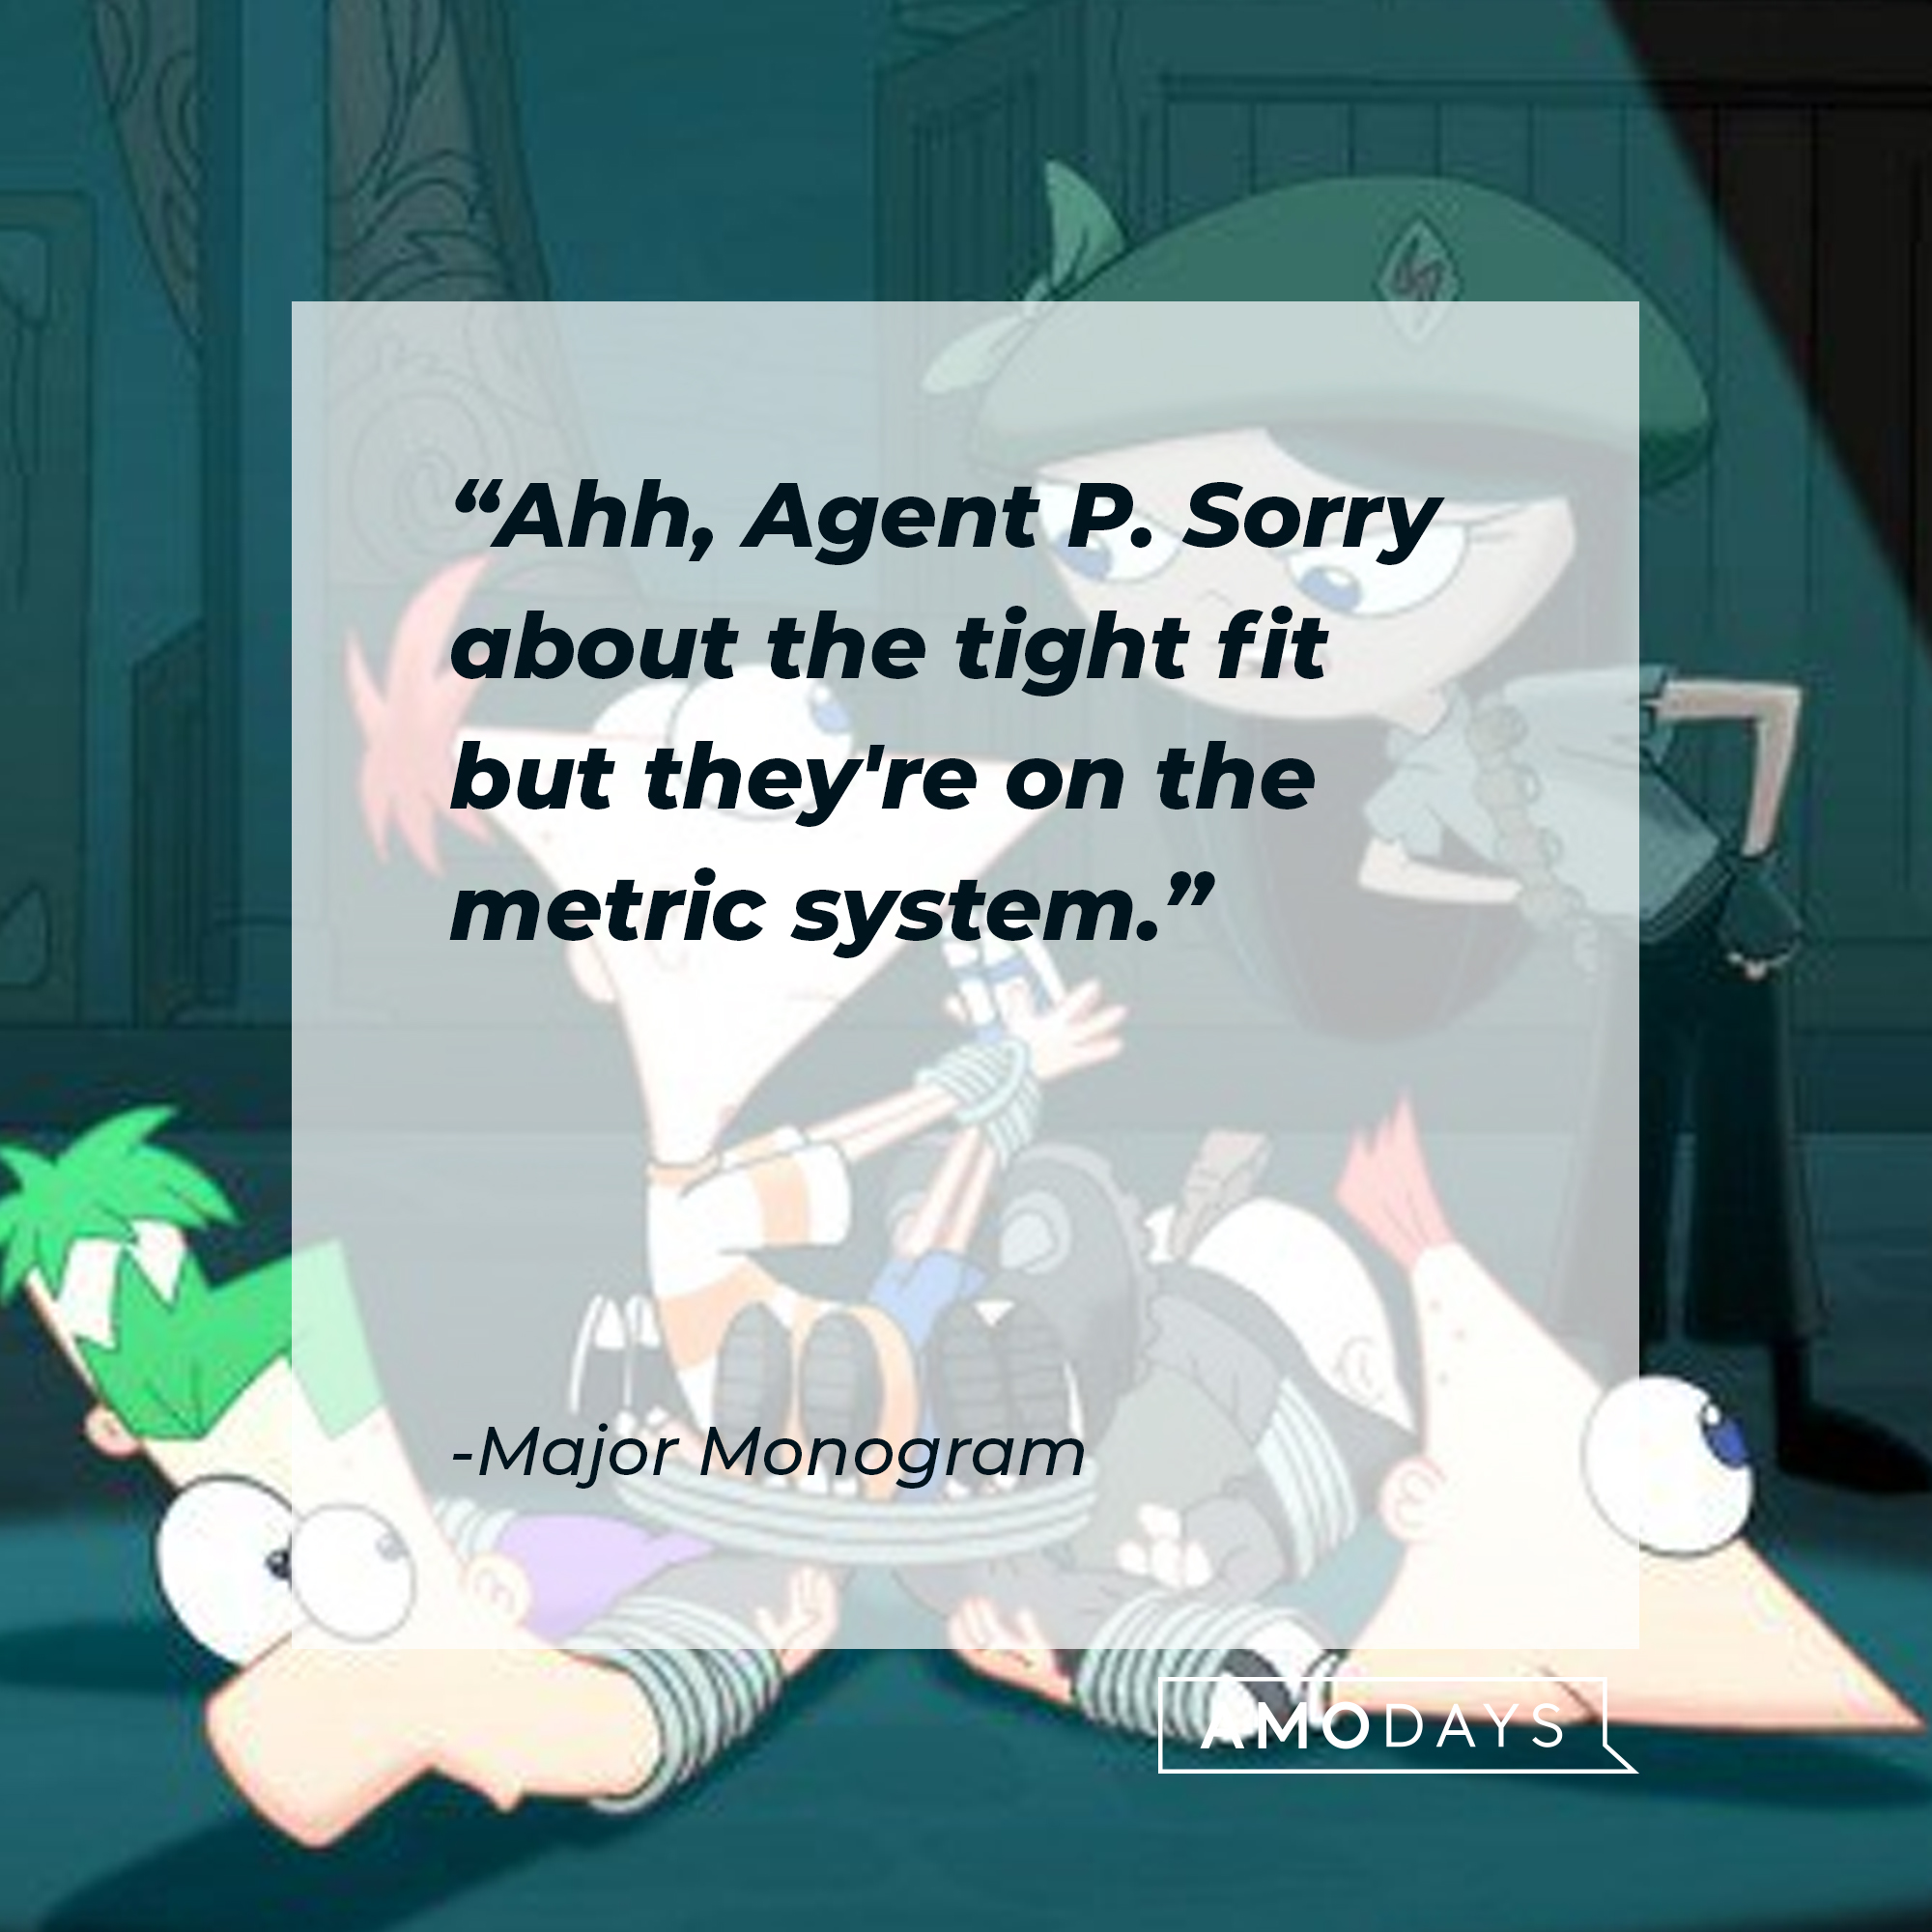 Major Monogram's quote: "Ahh, Agent P. Sorry about the tight fit but they're on the metric system." | Source: facebook.com/Phineas-and-Ferb